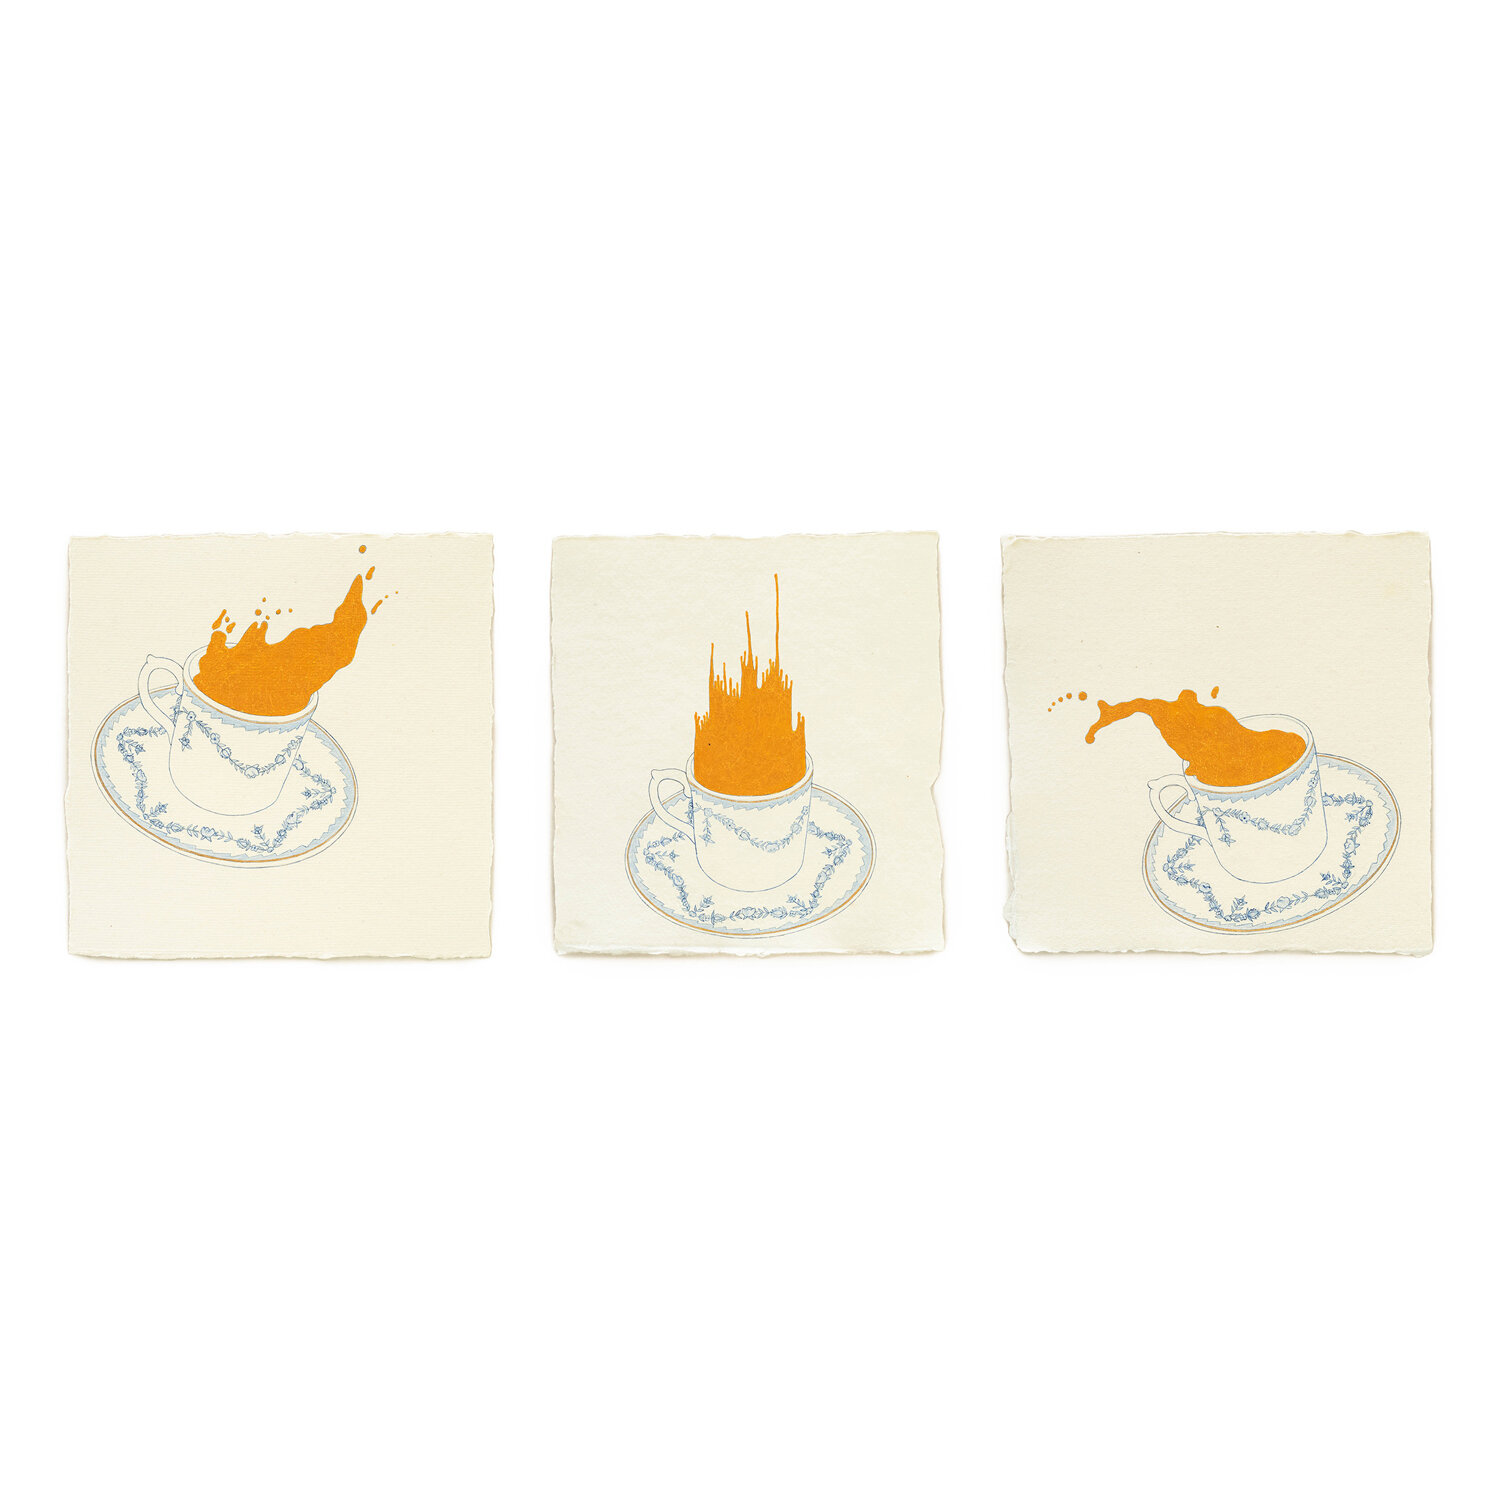   Fire Diary (Portuguese Cups),  2020 Acrylic on paper, 6” x 6” each 